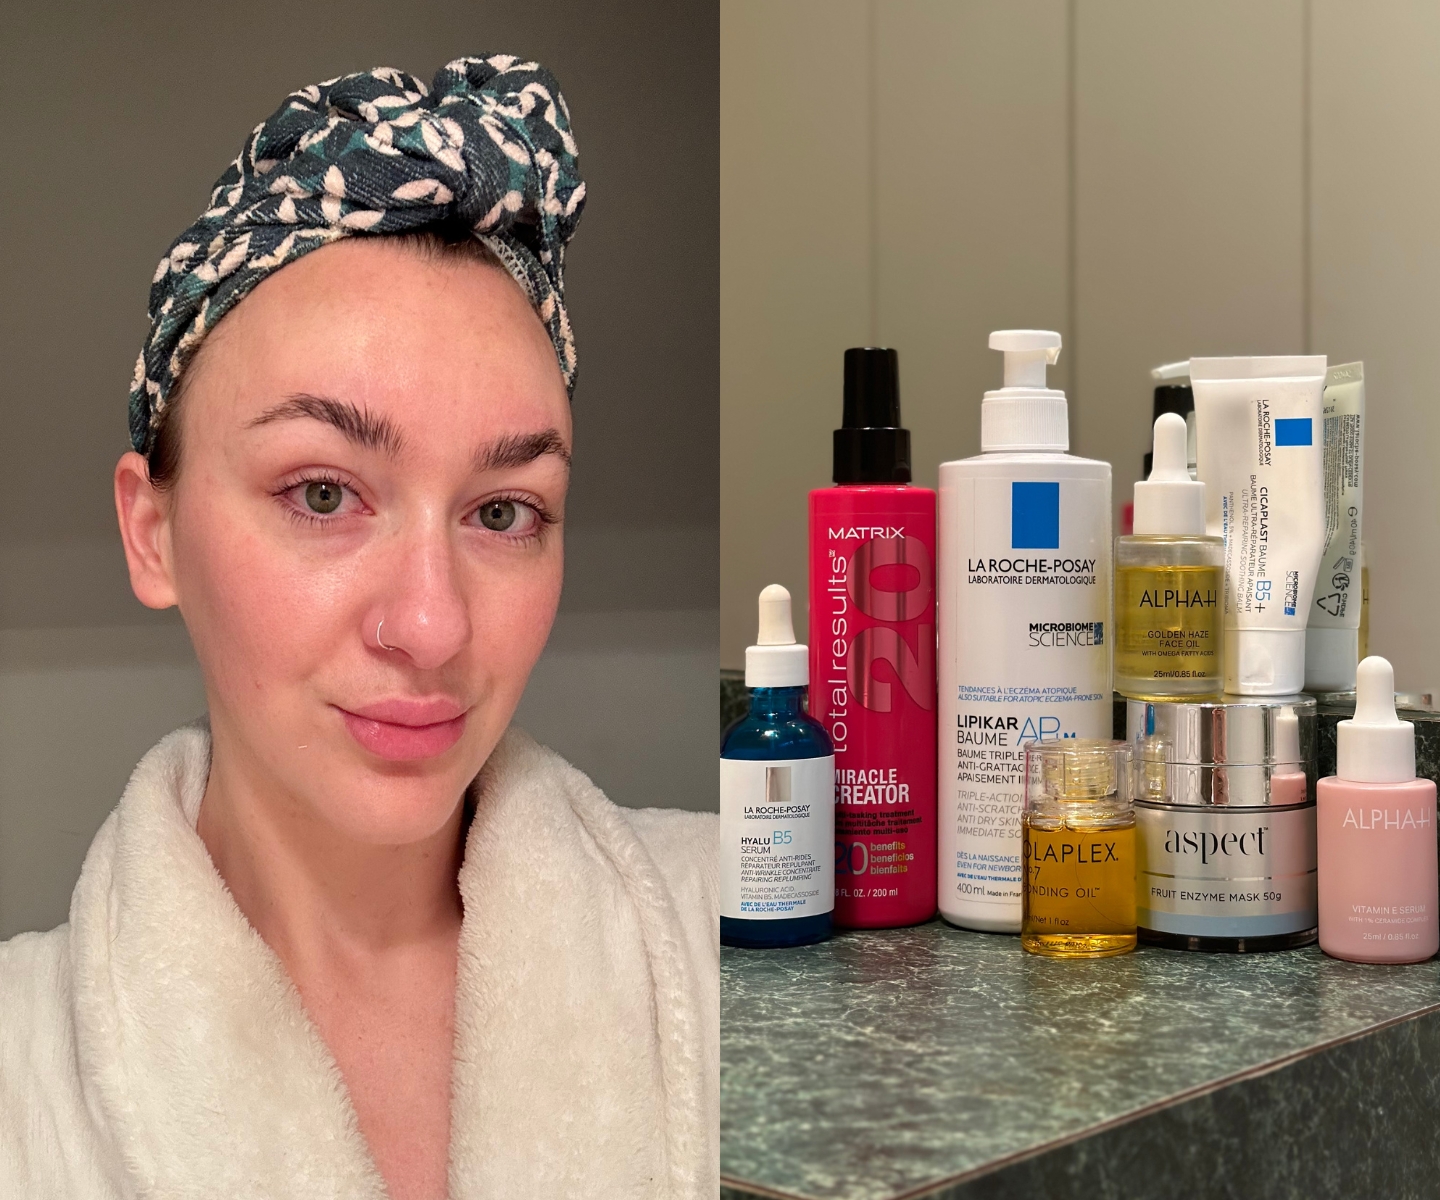 Jas everything shower product lineup selfie split